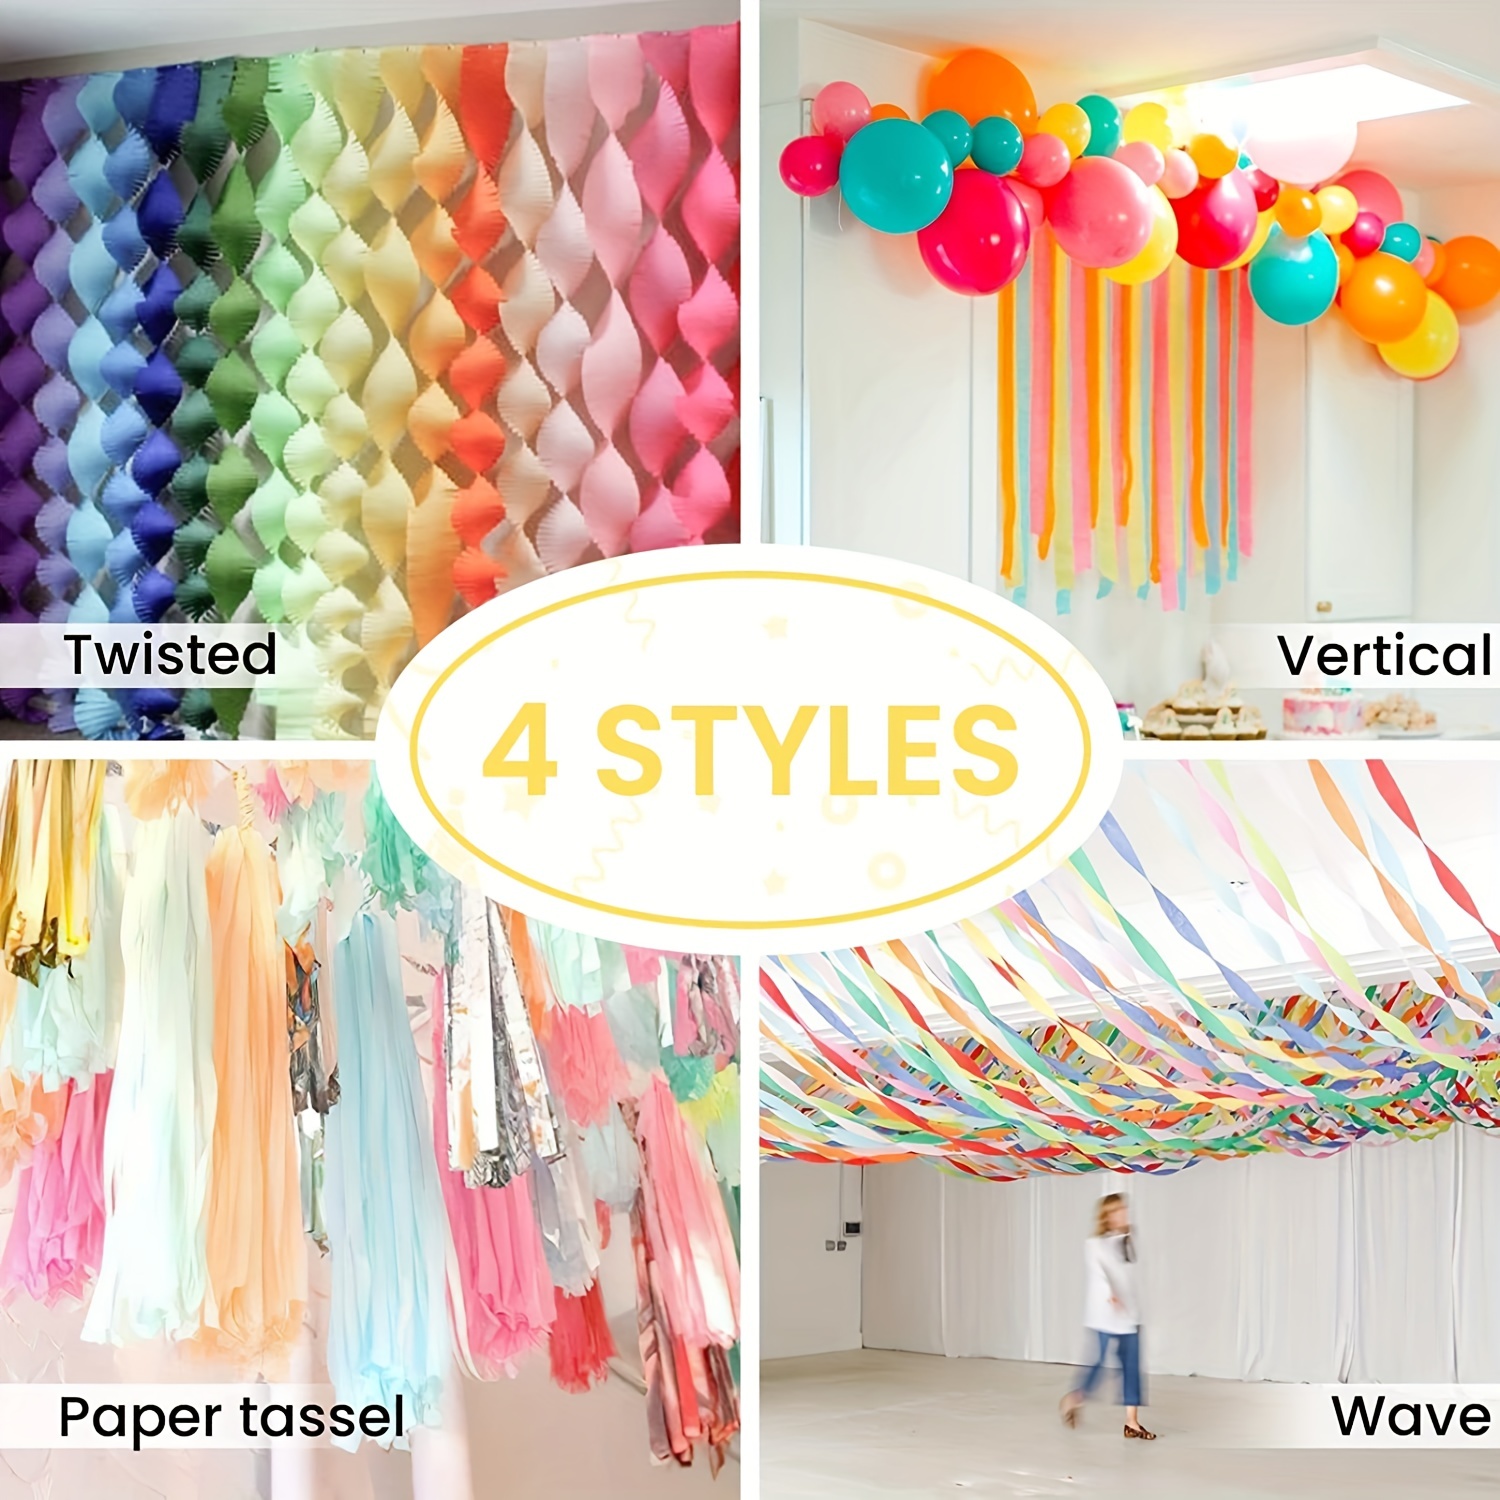 PartyWoo Crepe Paper Streamers 6 Rolls 492ft, Pack of Rainbow Color Party Streamers for Party Decorations, Birthday Decorations, Wedding Decorations